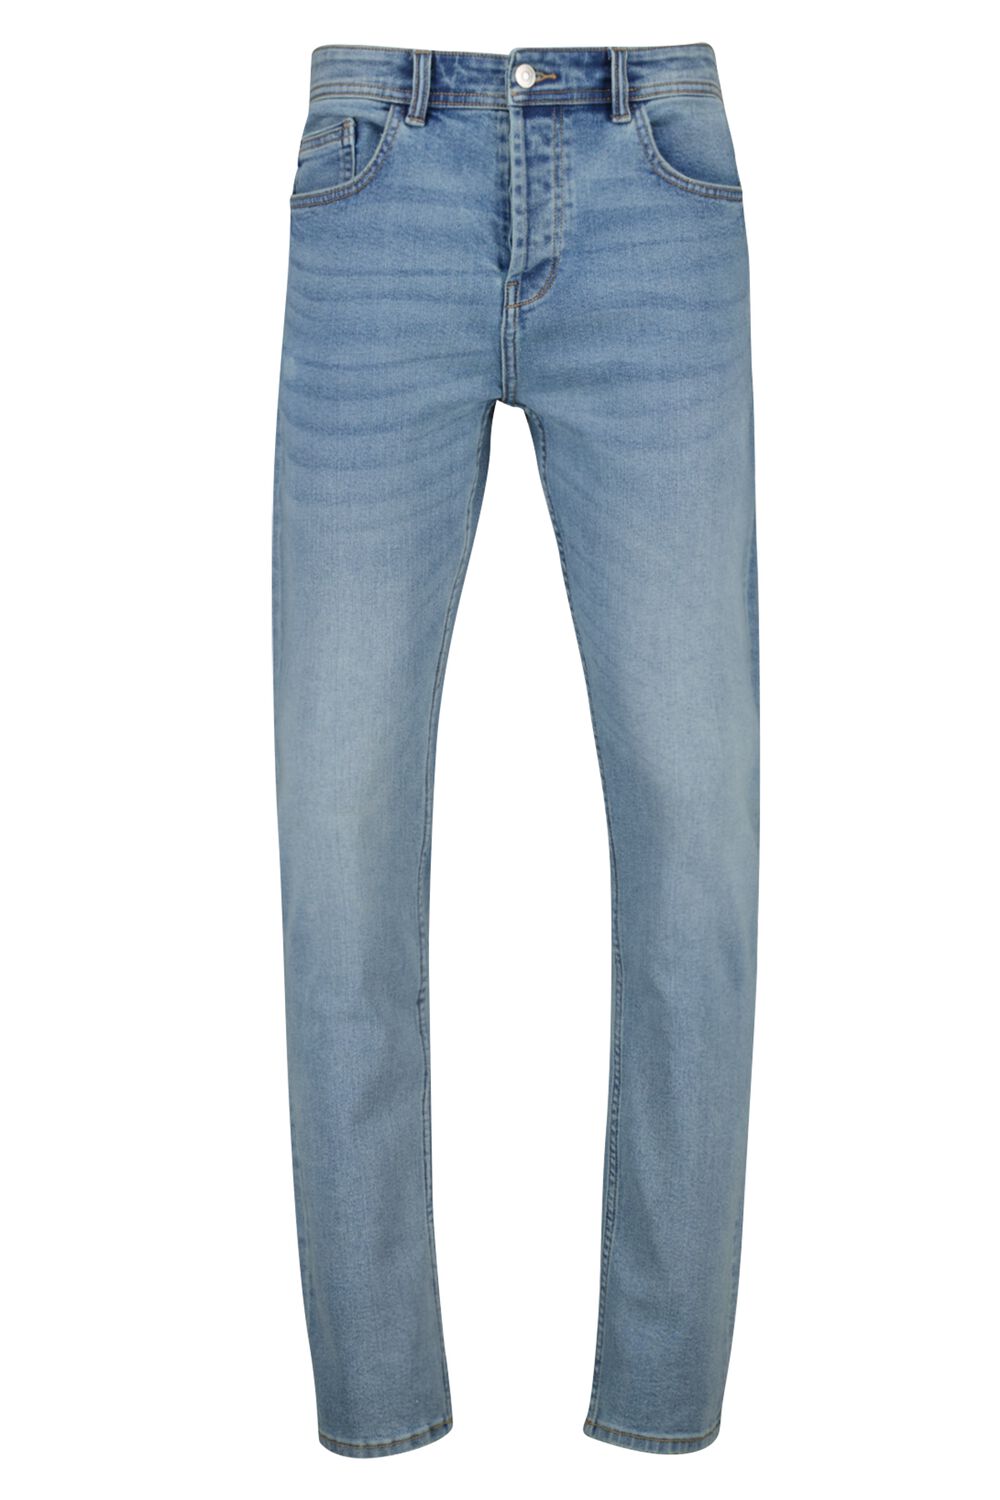 America Today Heren Jeans Neil Blauw product